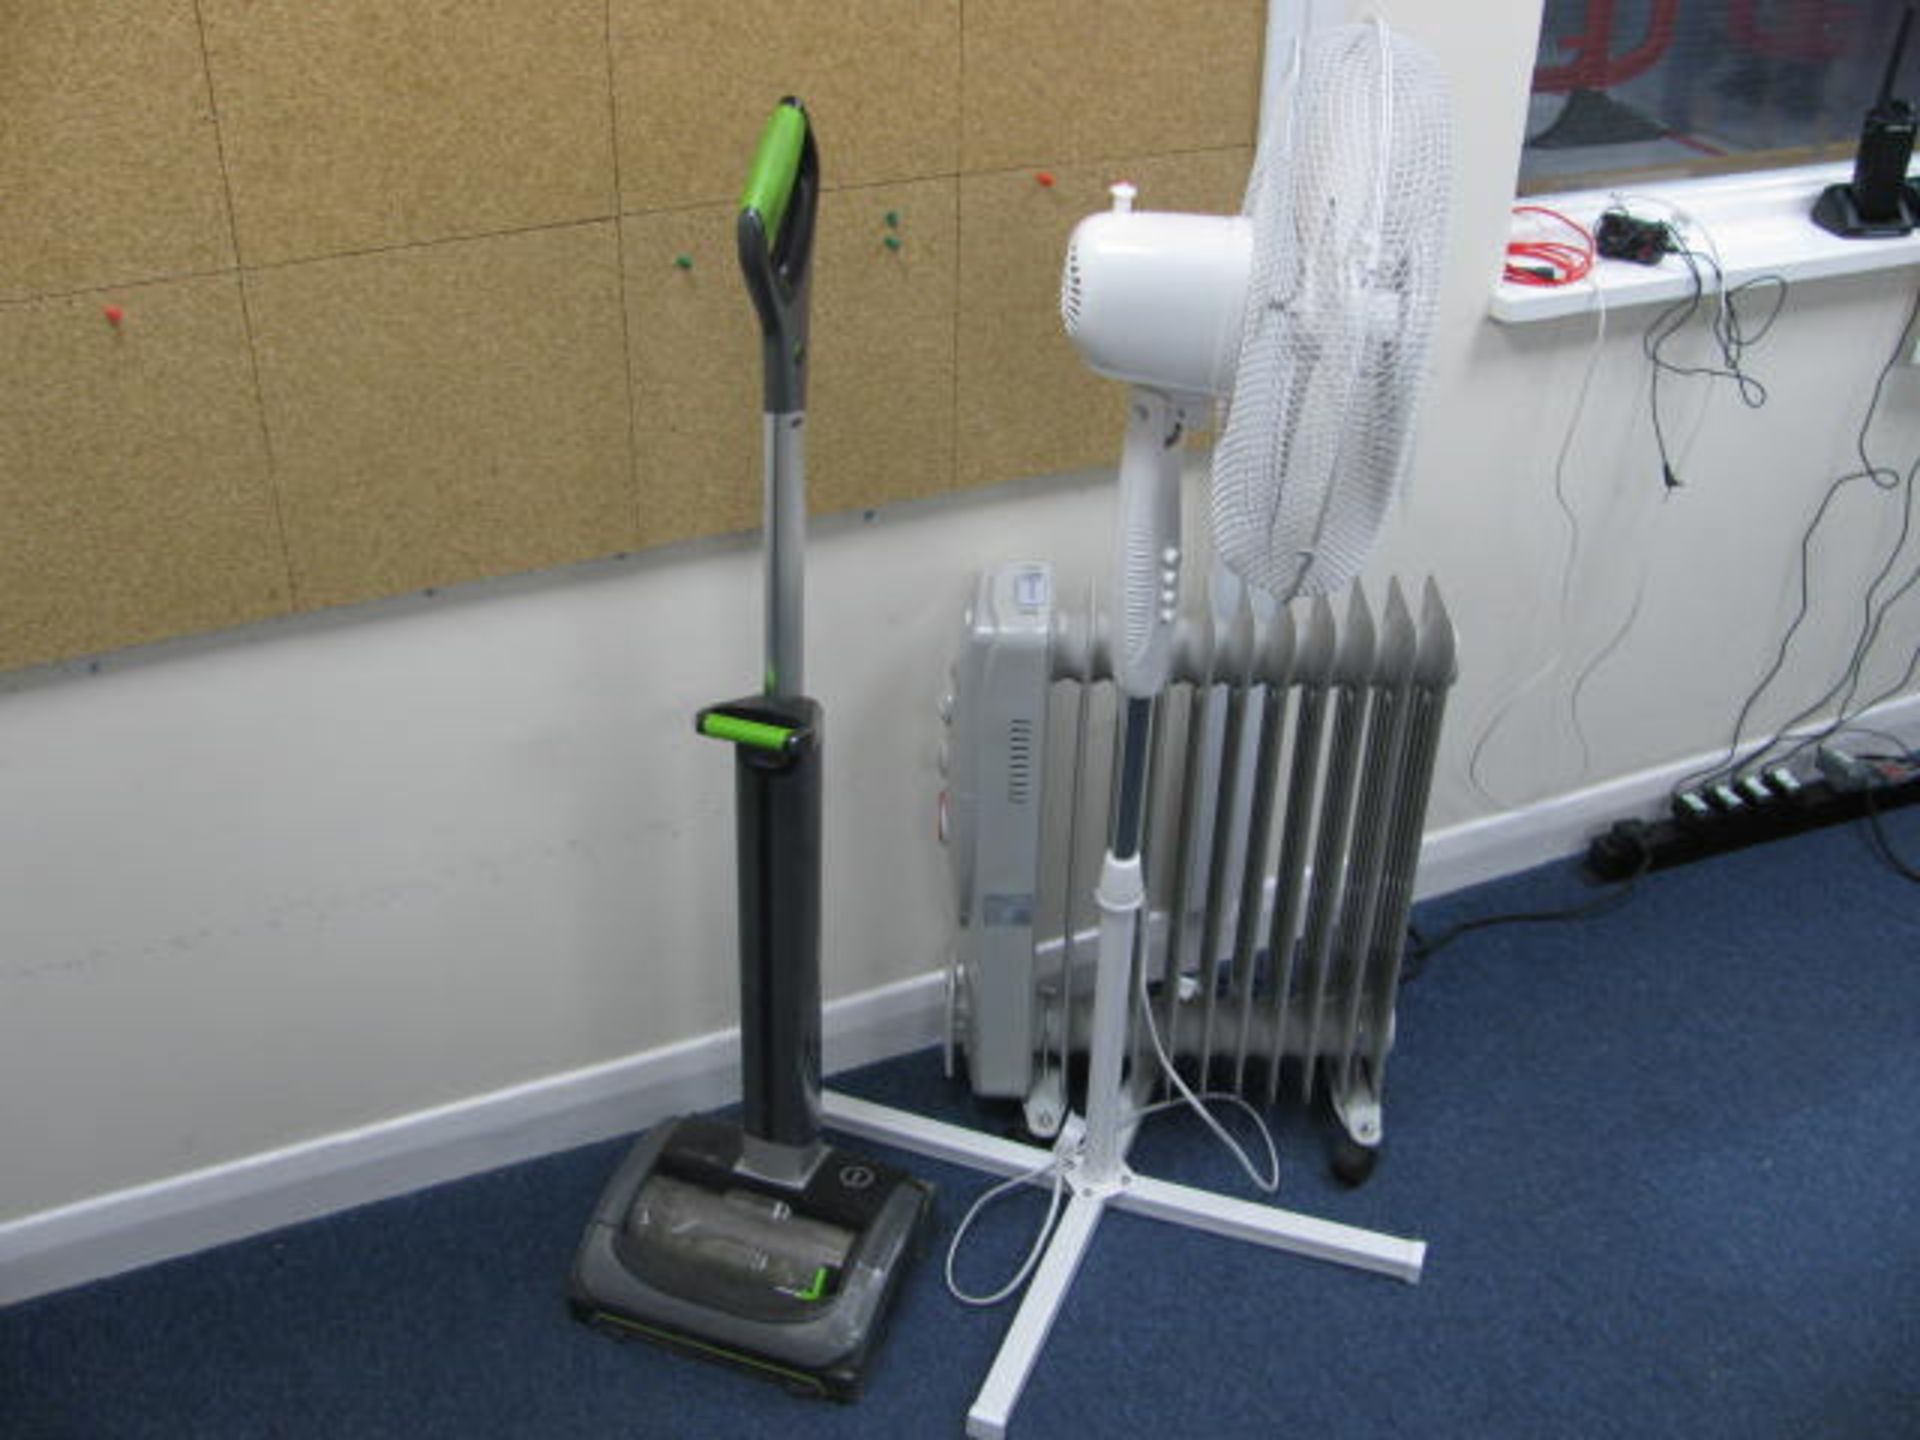 Pedestal fan, Pro Breeze mobile heater and Gtech Air Ram vacuum cleaner - Image 3 of 3